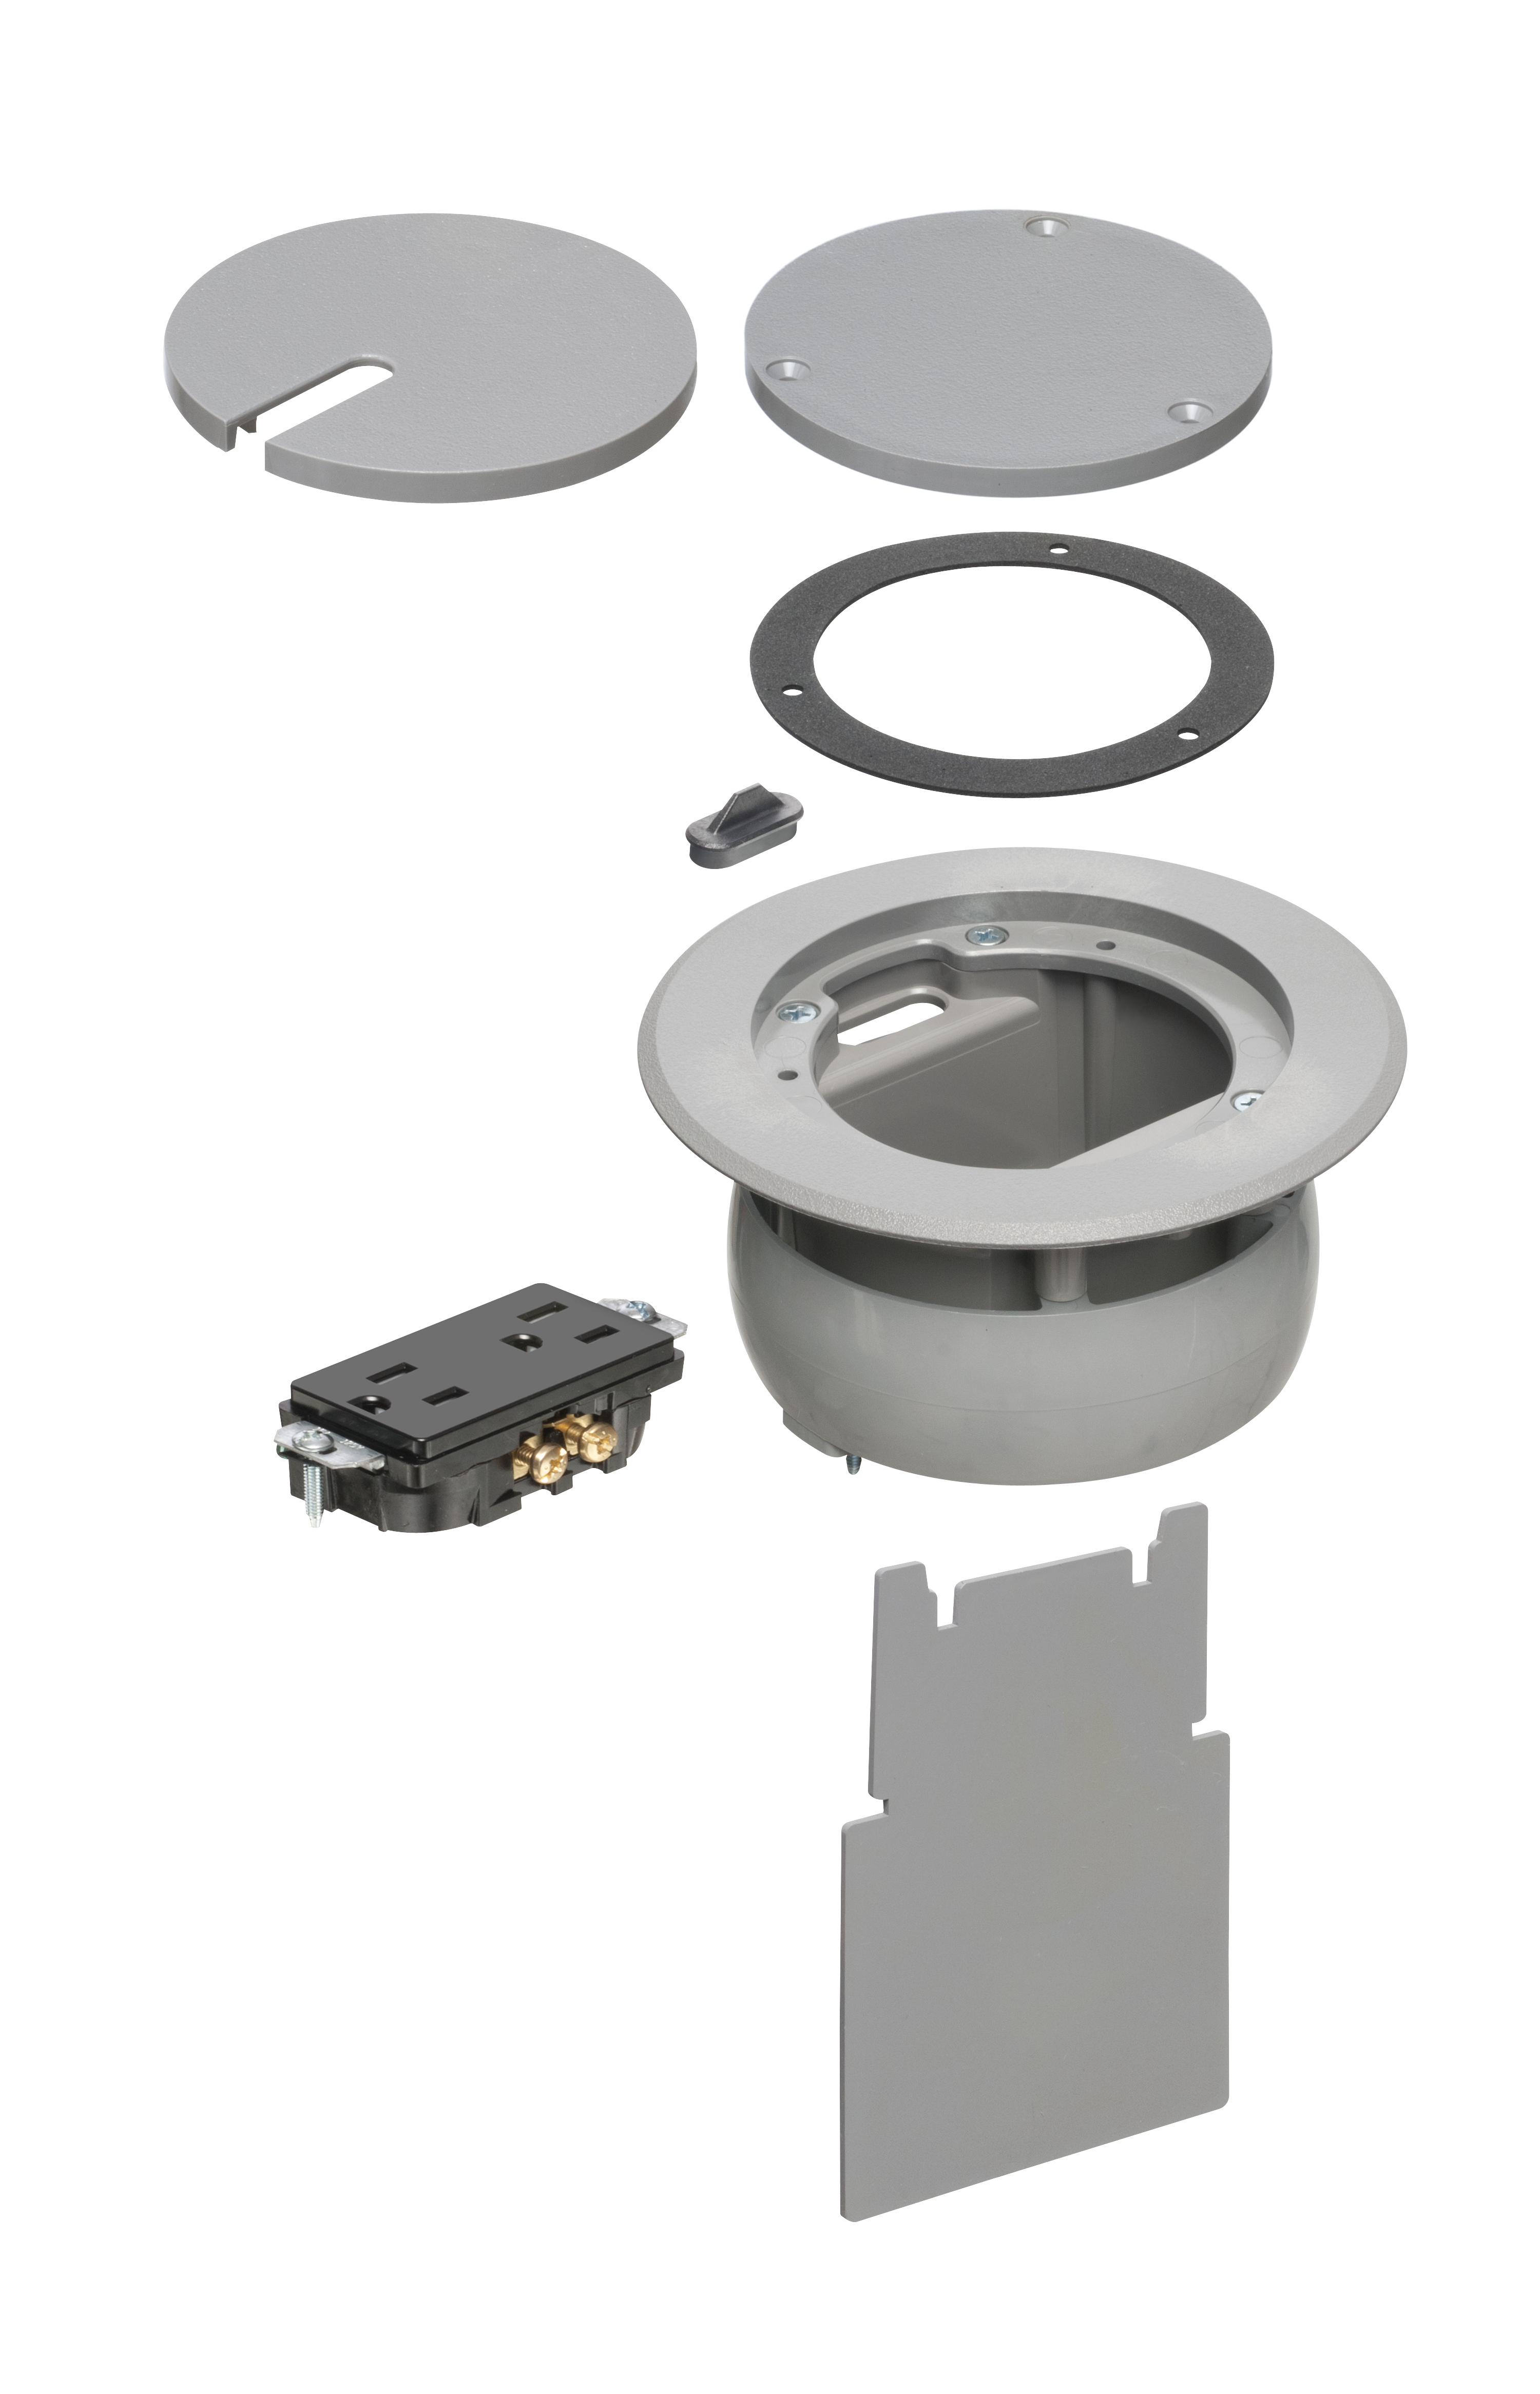 IN BOX cover kit. recessed receptacle and low voltage keystone for new concrete. Installs in Arlington's FLBC4500 and FLBC4502 box. Non metallic. Color Gray.